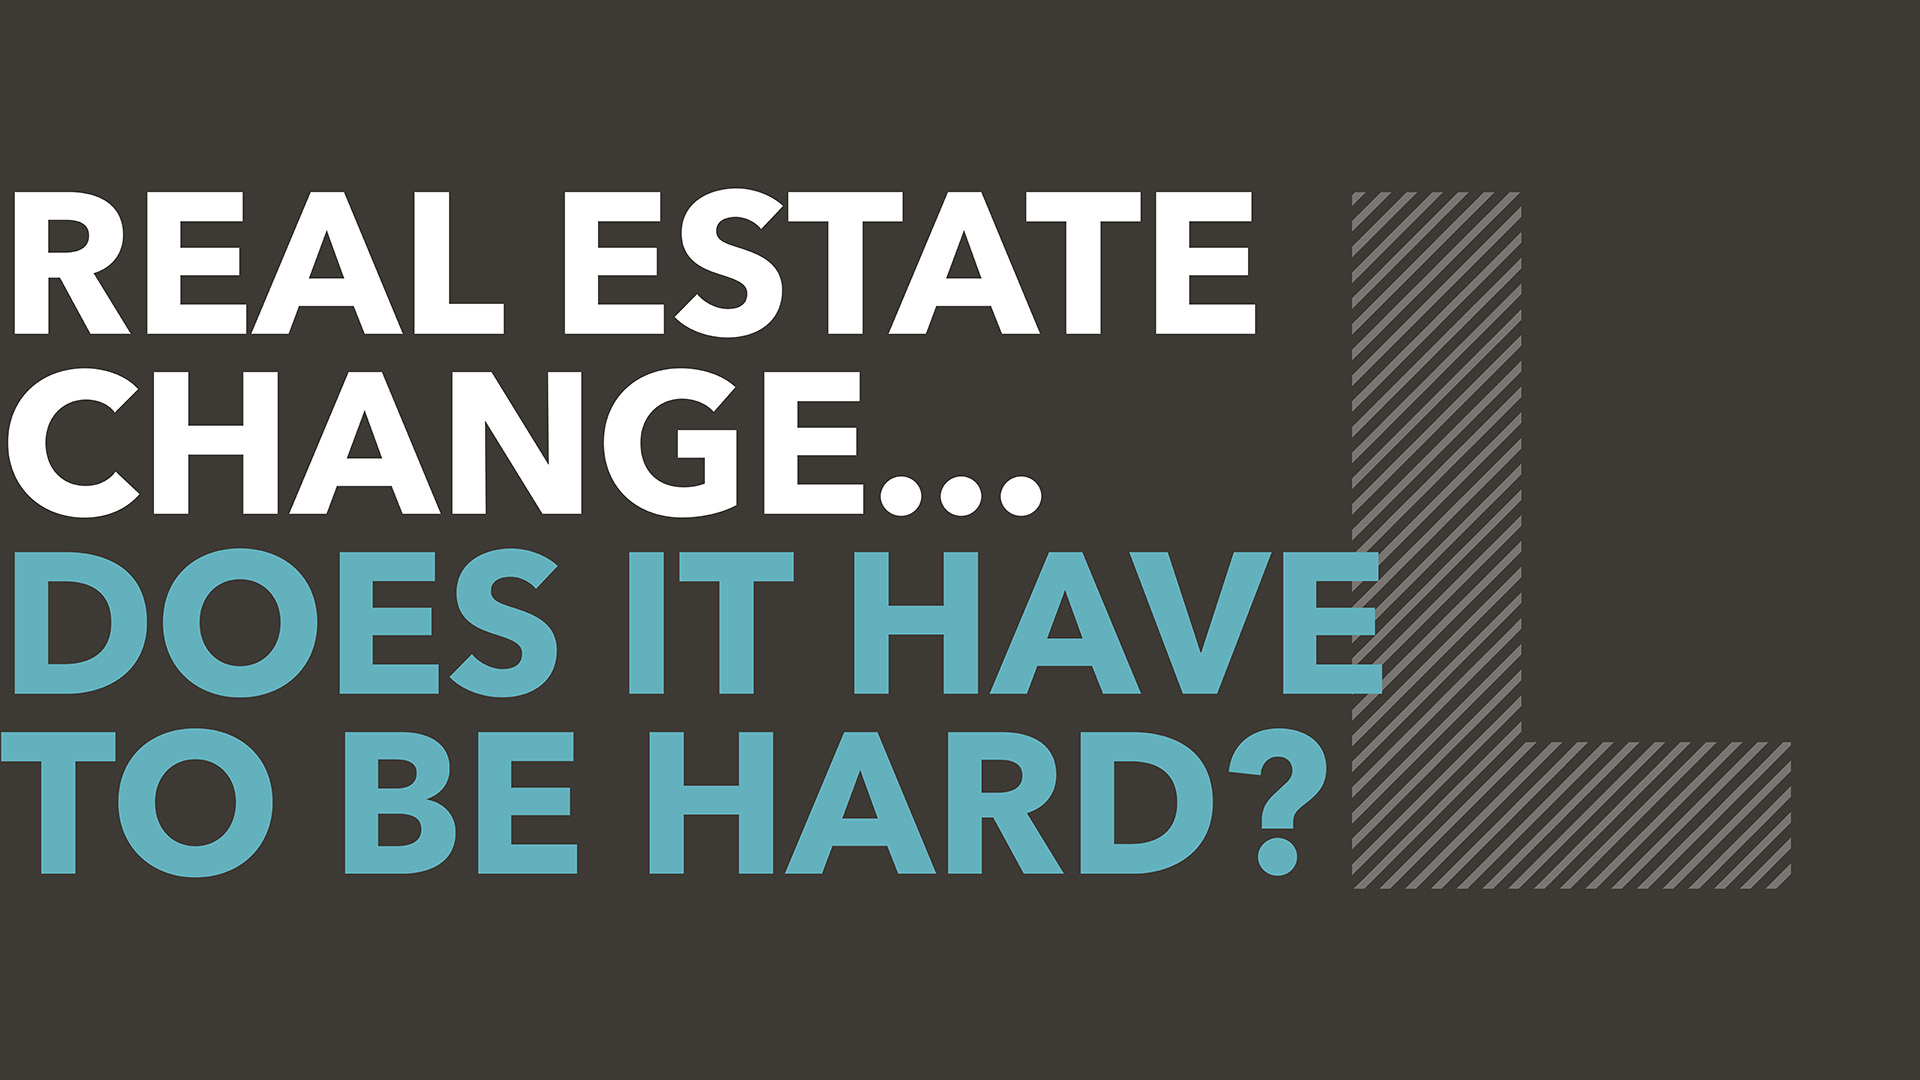 Real estate change…does it have to be hard?